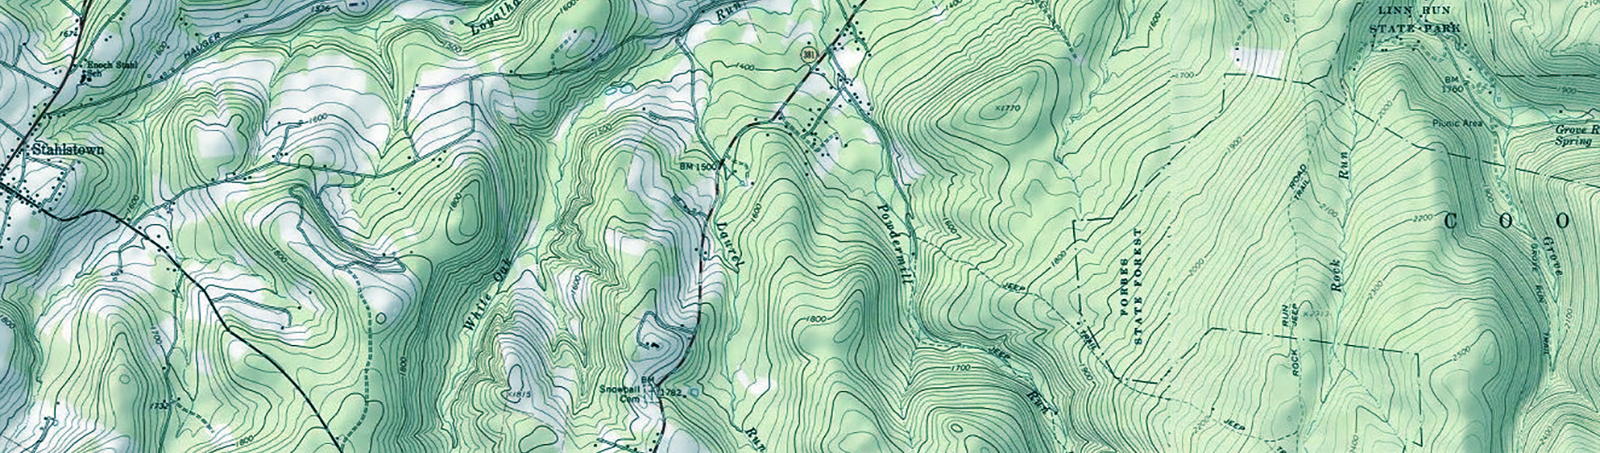 Topographical map of southwestern Pennsylvania